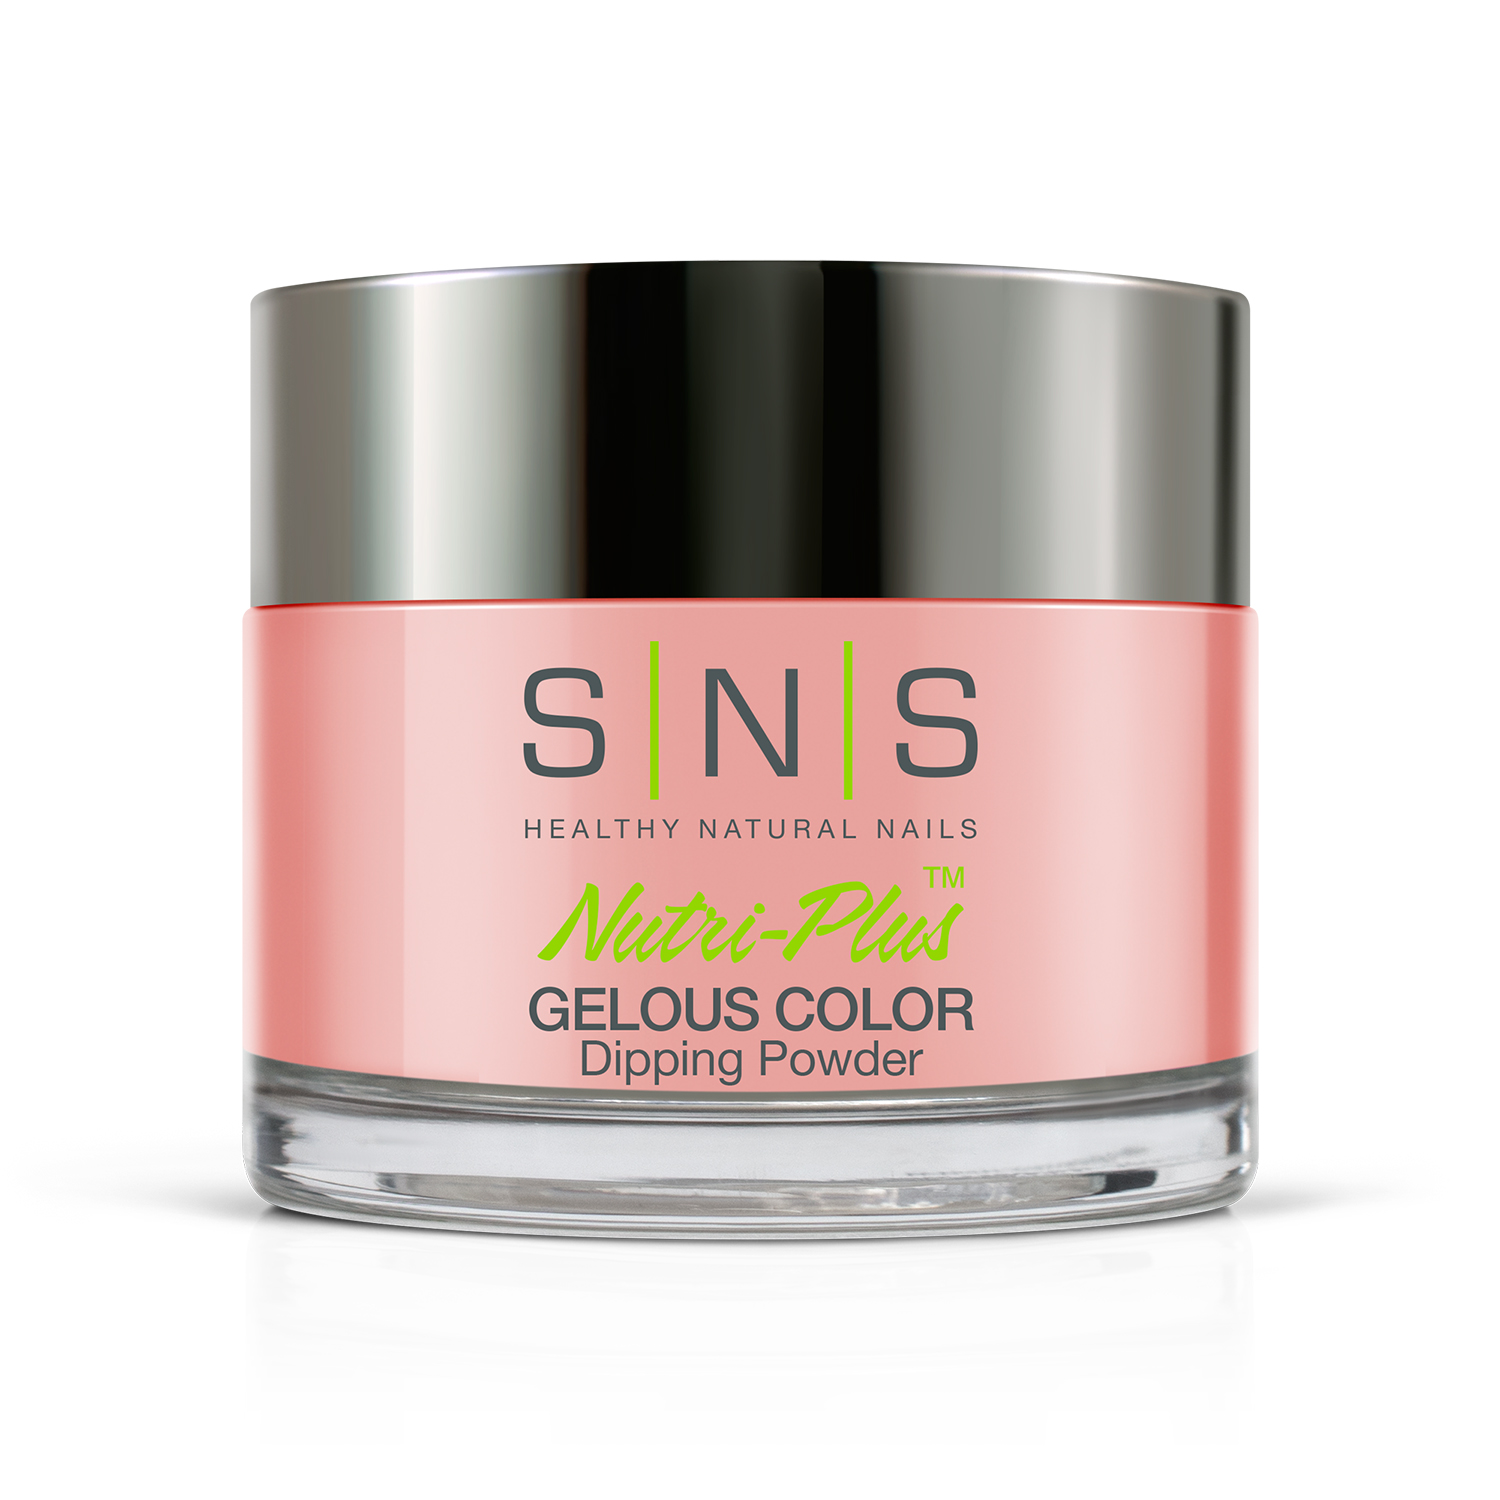 SNS Nails AC14 Babedelicious 28g (1oz) | Gelous Dipping Powder